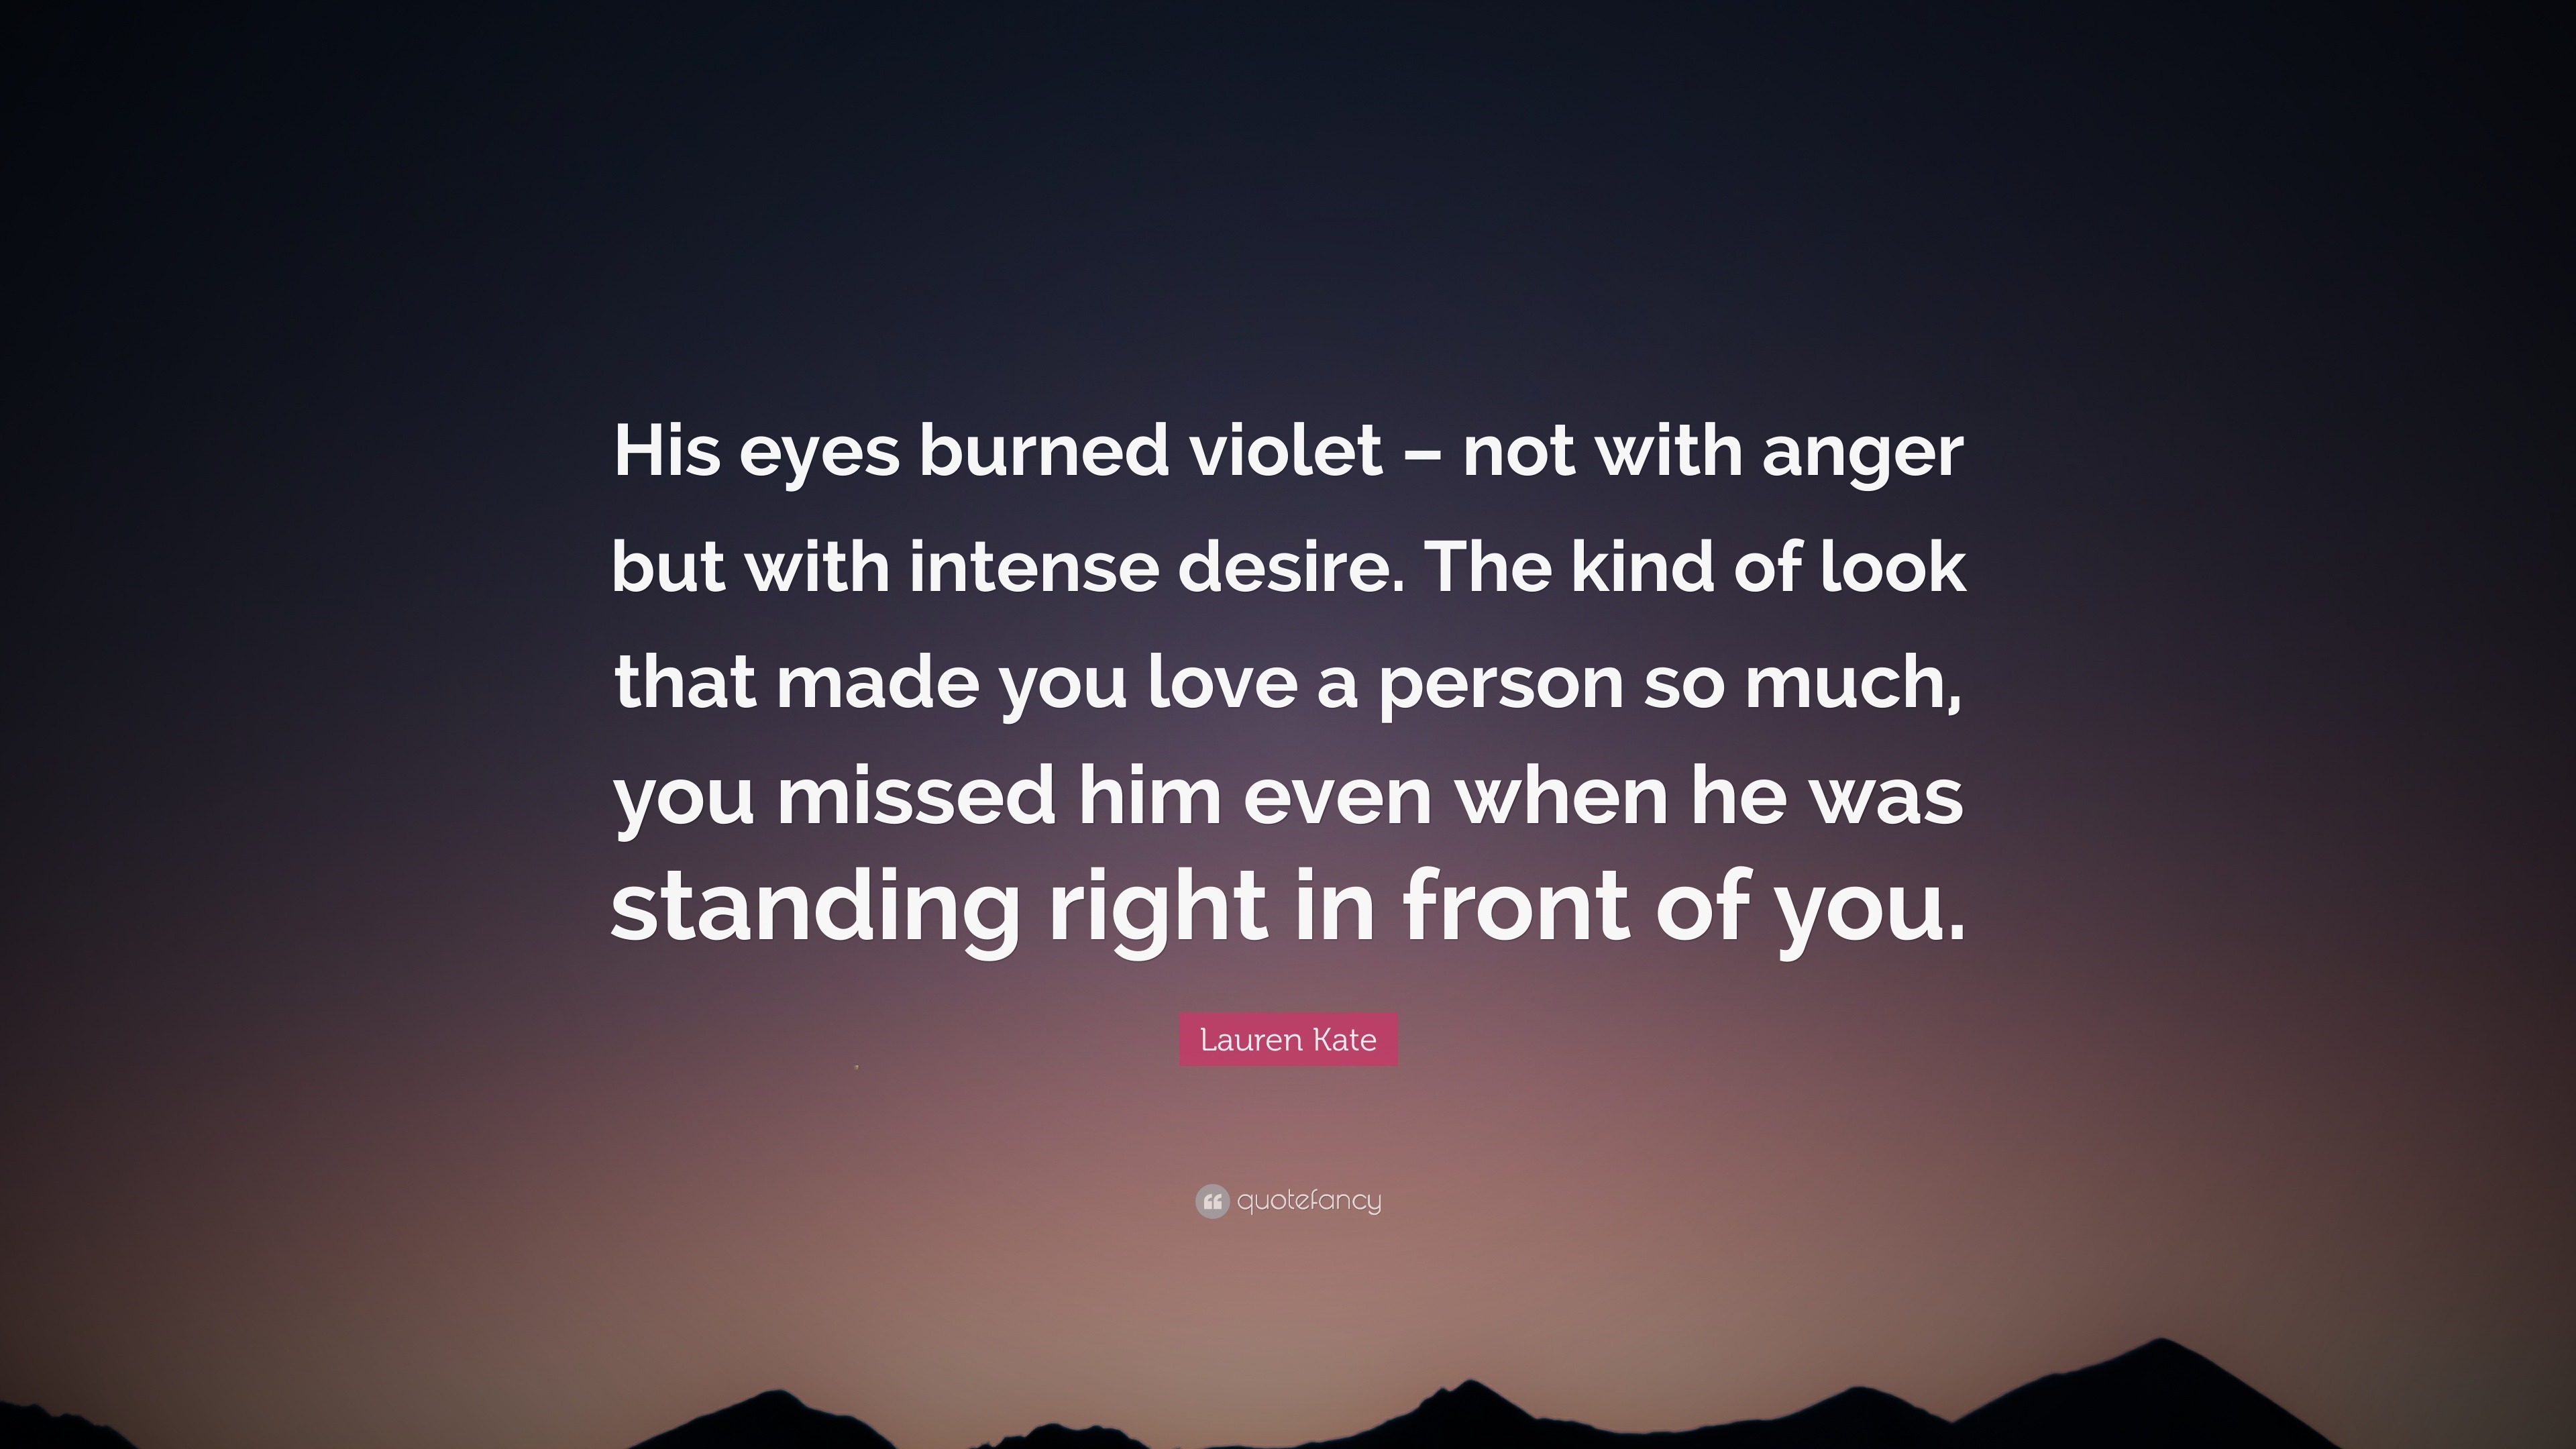 Lauren Kate Quote “His eyes burned violet – not with anger but with intense